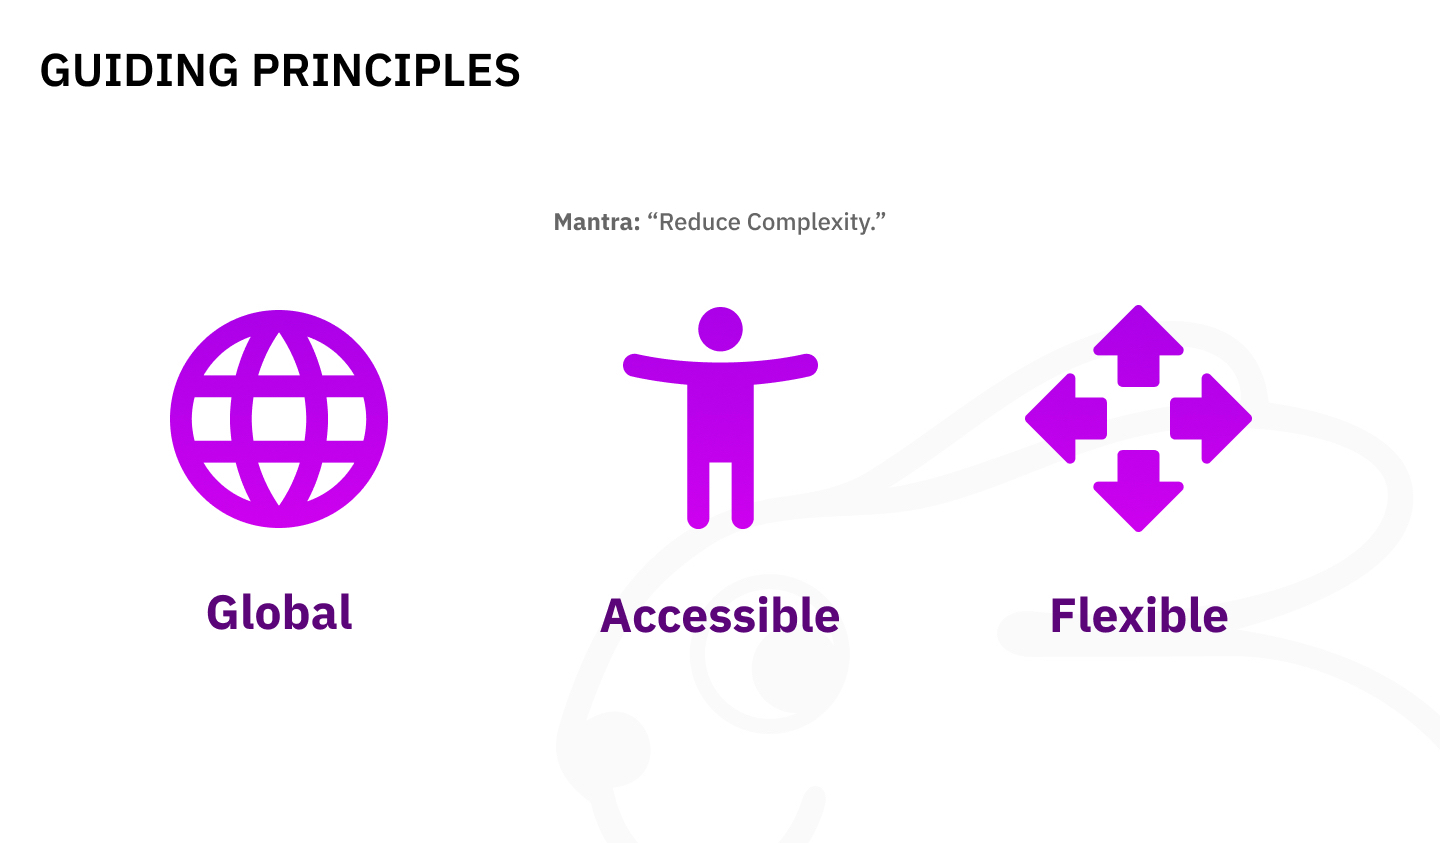 A screenshot of a presentation slide with icons and text that reads: 'Guiding Principles - Global, Accessible, Flexible'